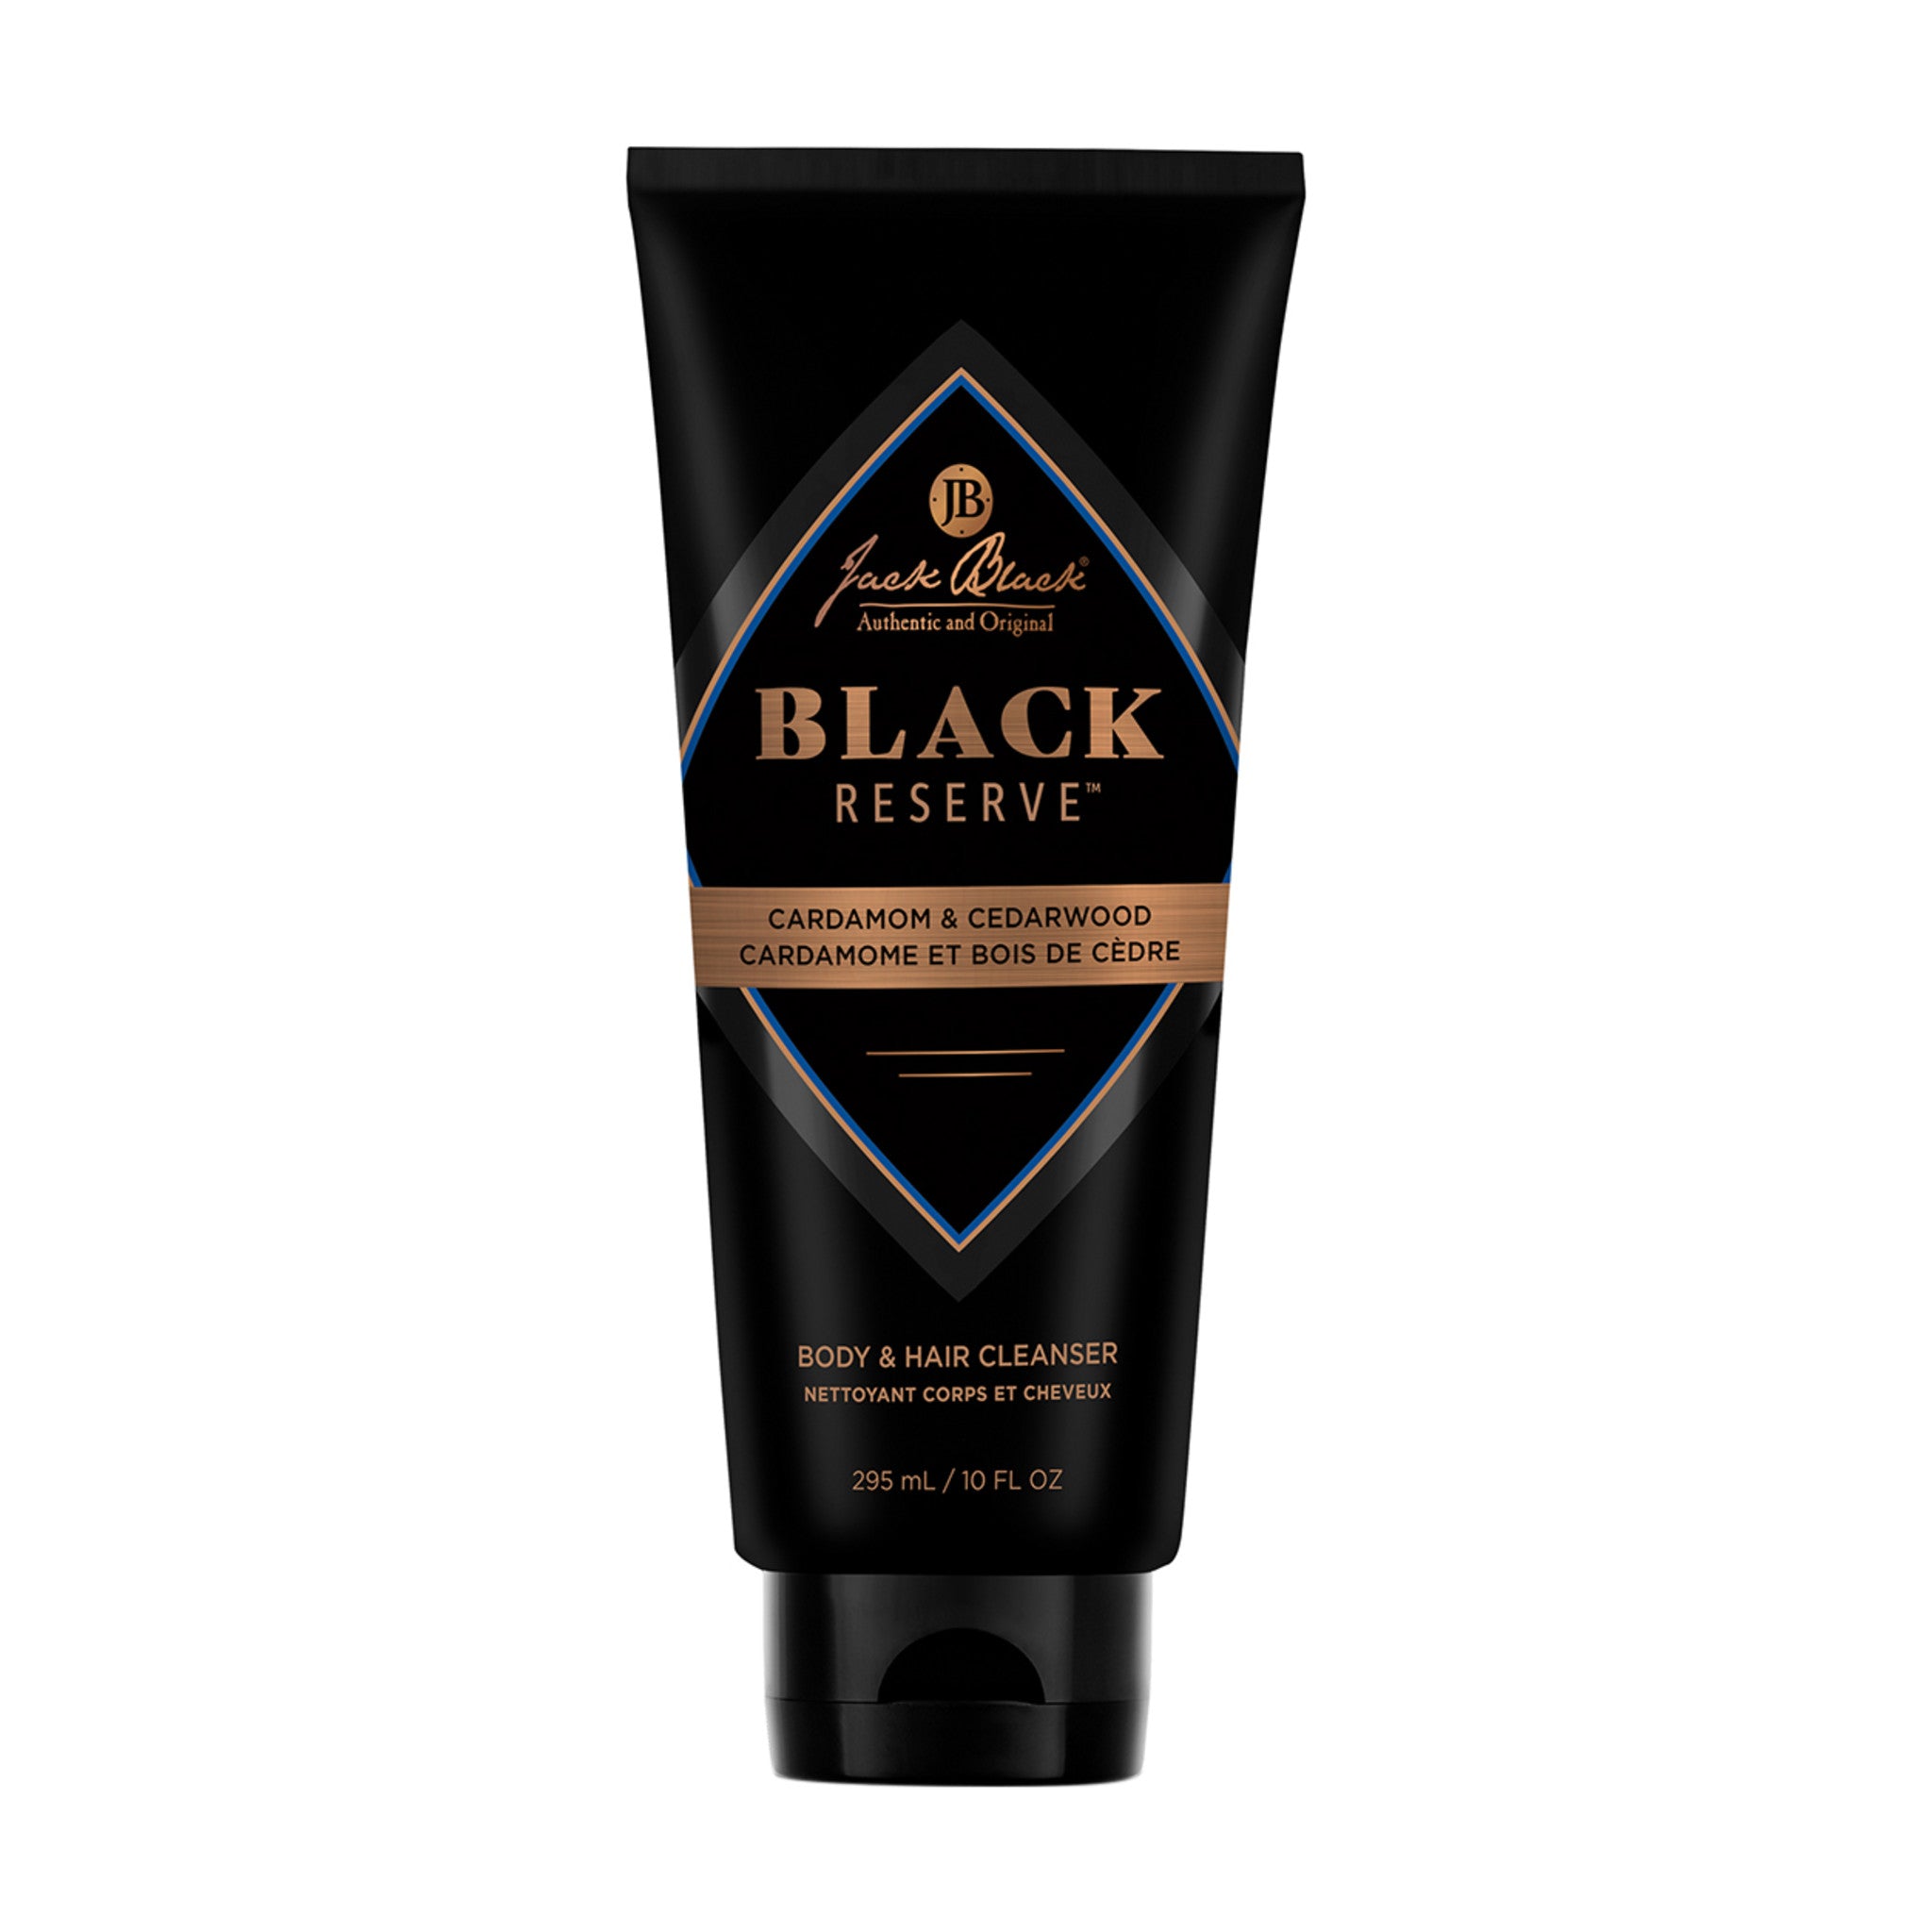 Jack Black Black Reserve Body and Hair Cleanser main image.